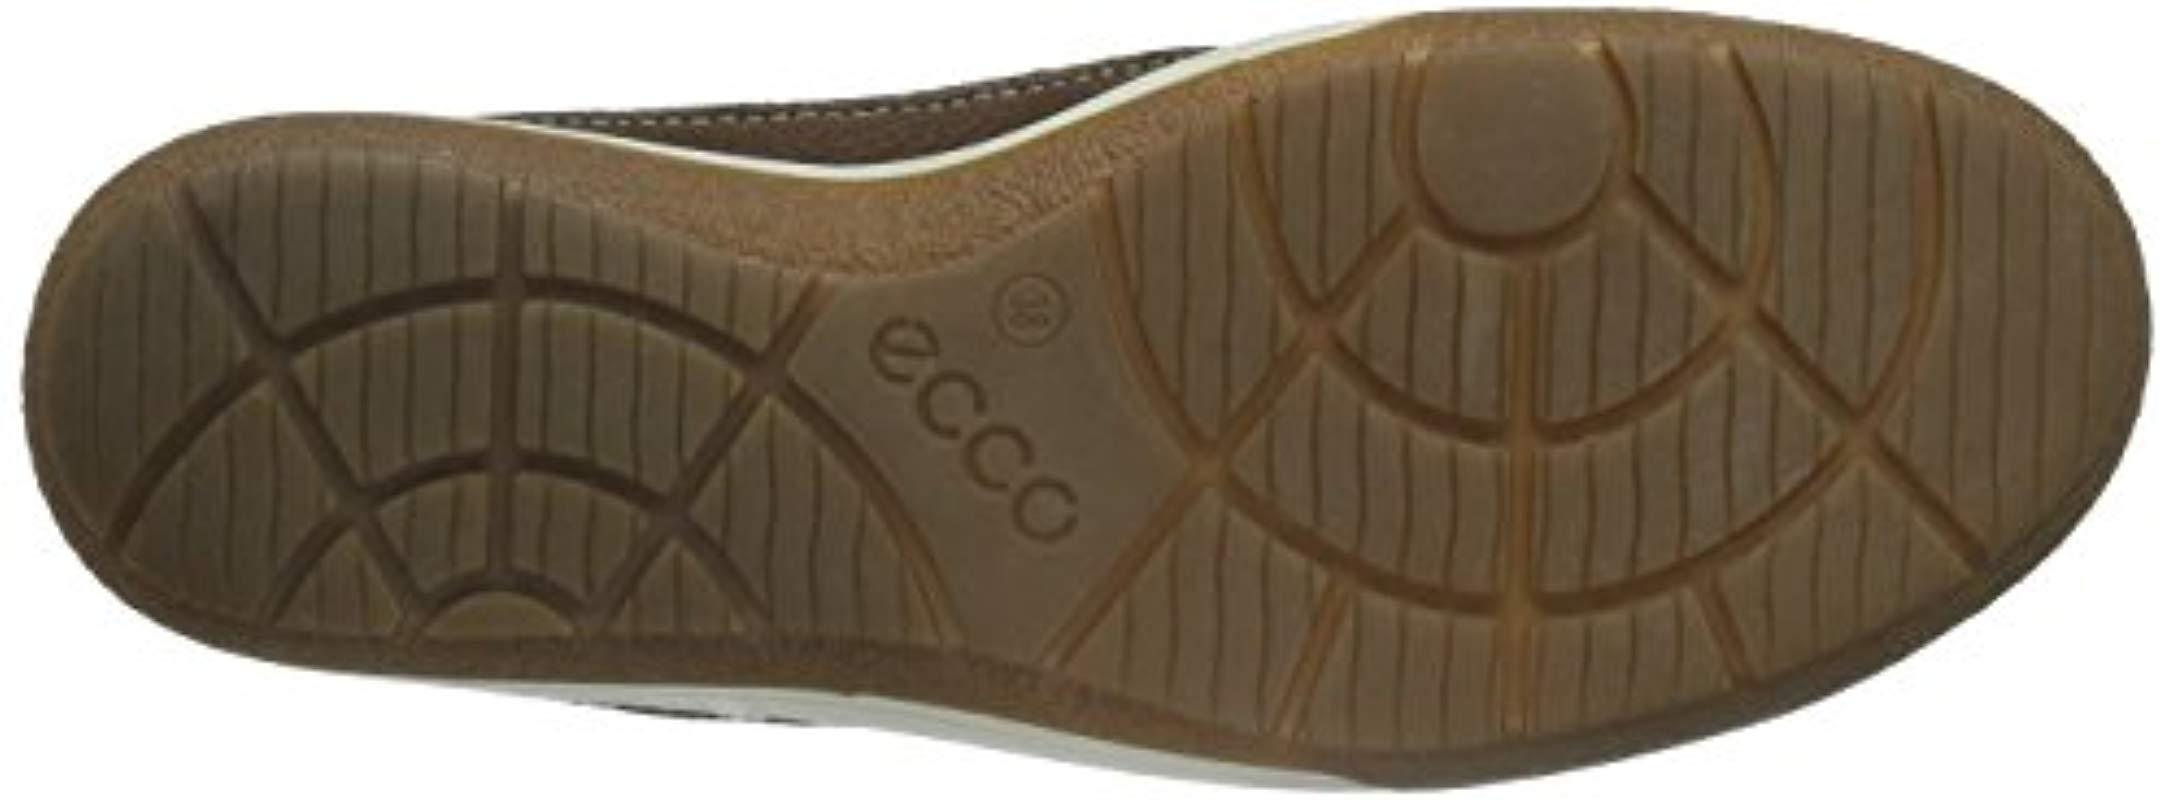 ecco chase